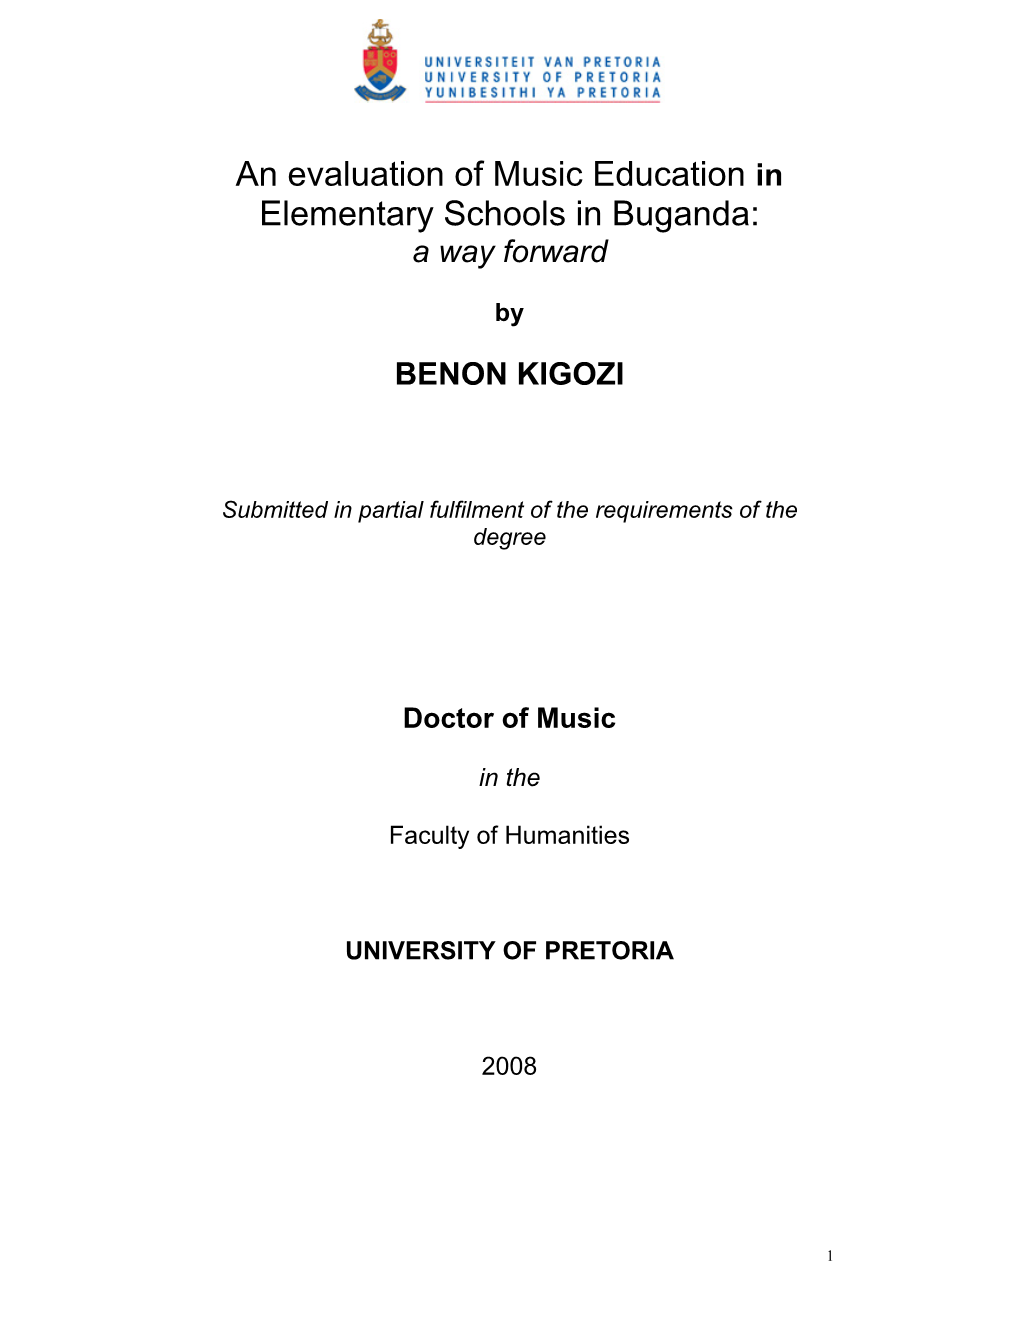 An Evaluation of Music Education in Elementary Schools in Buganda: a Way Forward